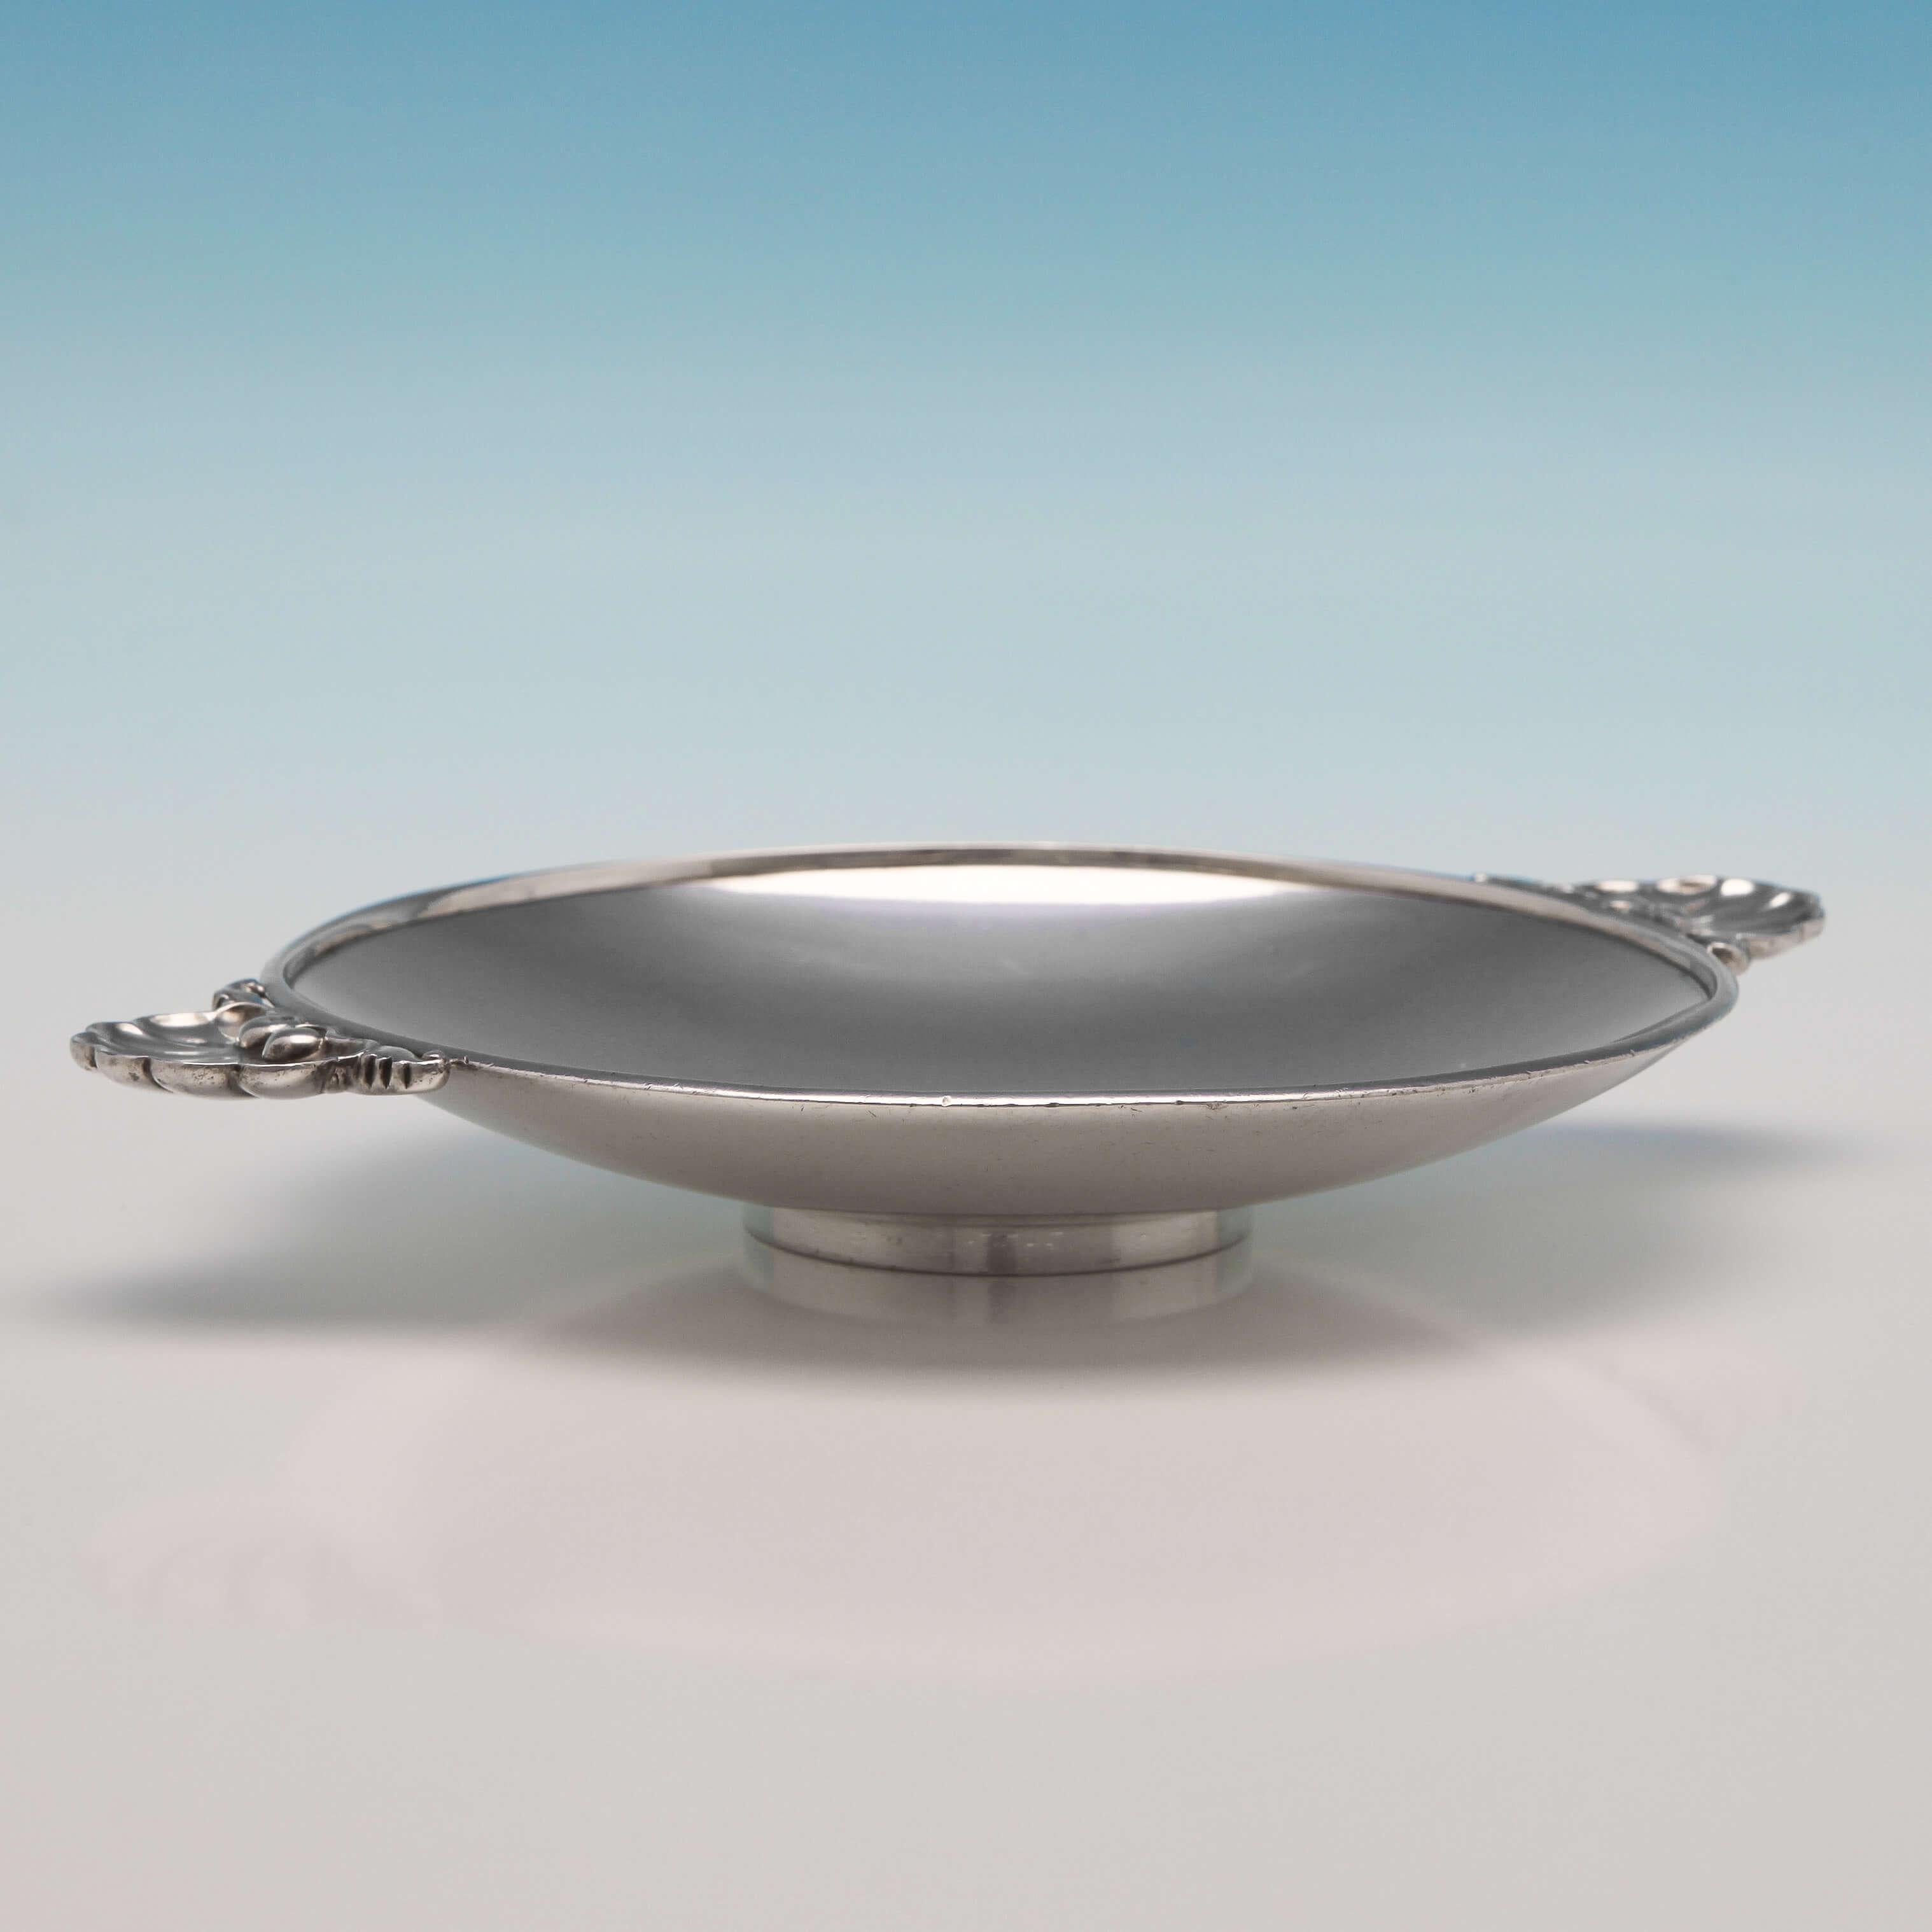 Made circa 1950 in Denmark by Georg Jensen, this lovely sterling silver dish has a plain, shallow bowl with two applied shell and scroll handles, and stands on a pedestal base. The dish measures 6.25